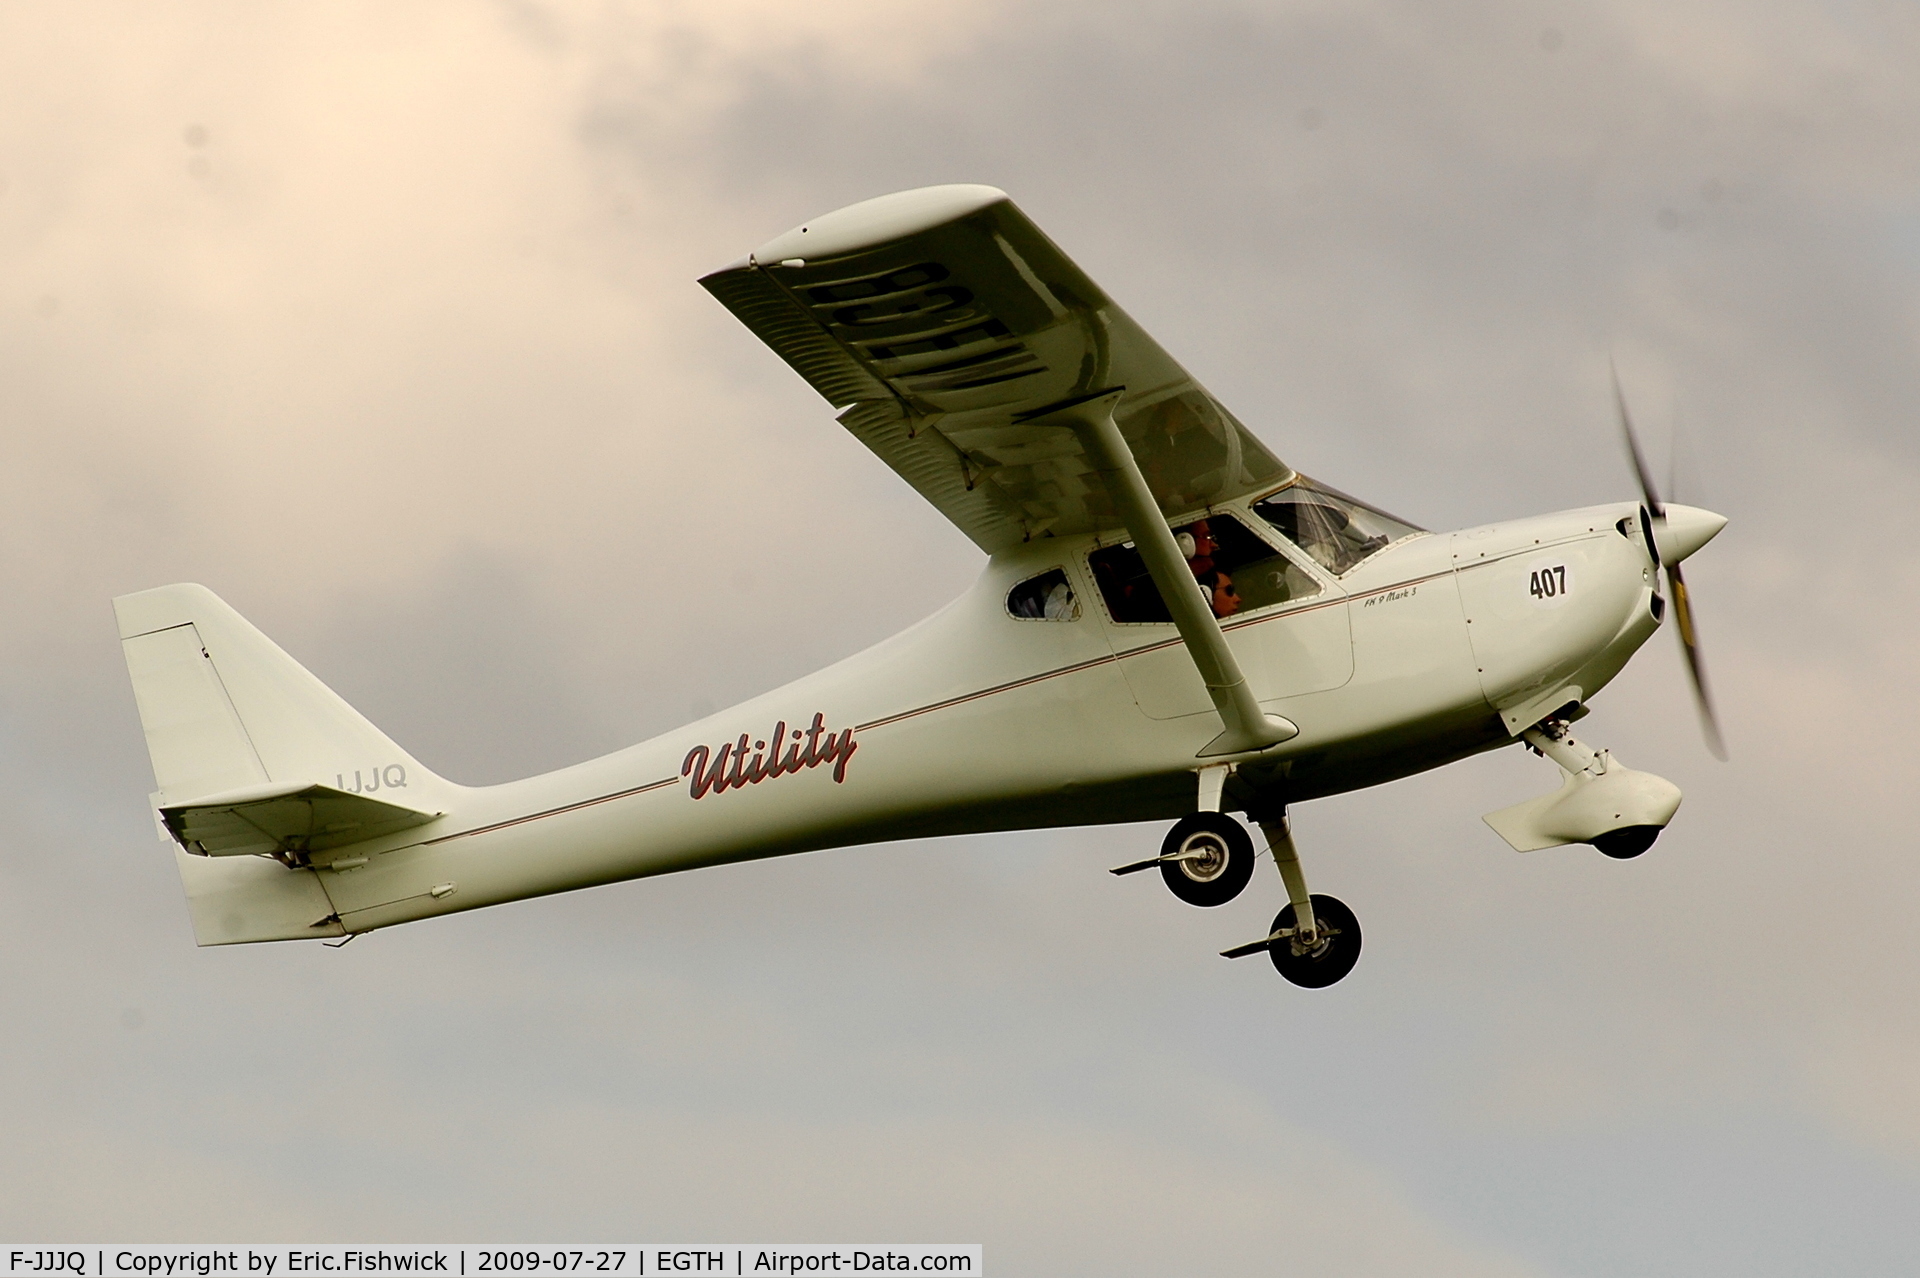 F-JJJQ, B & F Technik FK-9 Mark 3 Utility C/N 169, Sadly, it has been reported that this aircraft (No. 401 of 2012 Tour de France ULM) was destroyed attempting a landing on a very technical mountain airfield. (no fatalities)